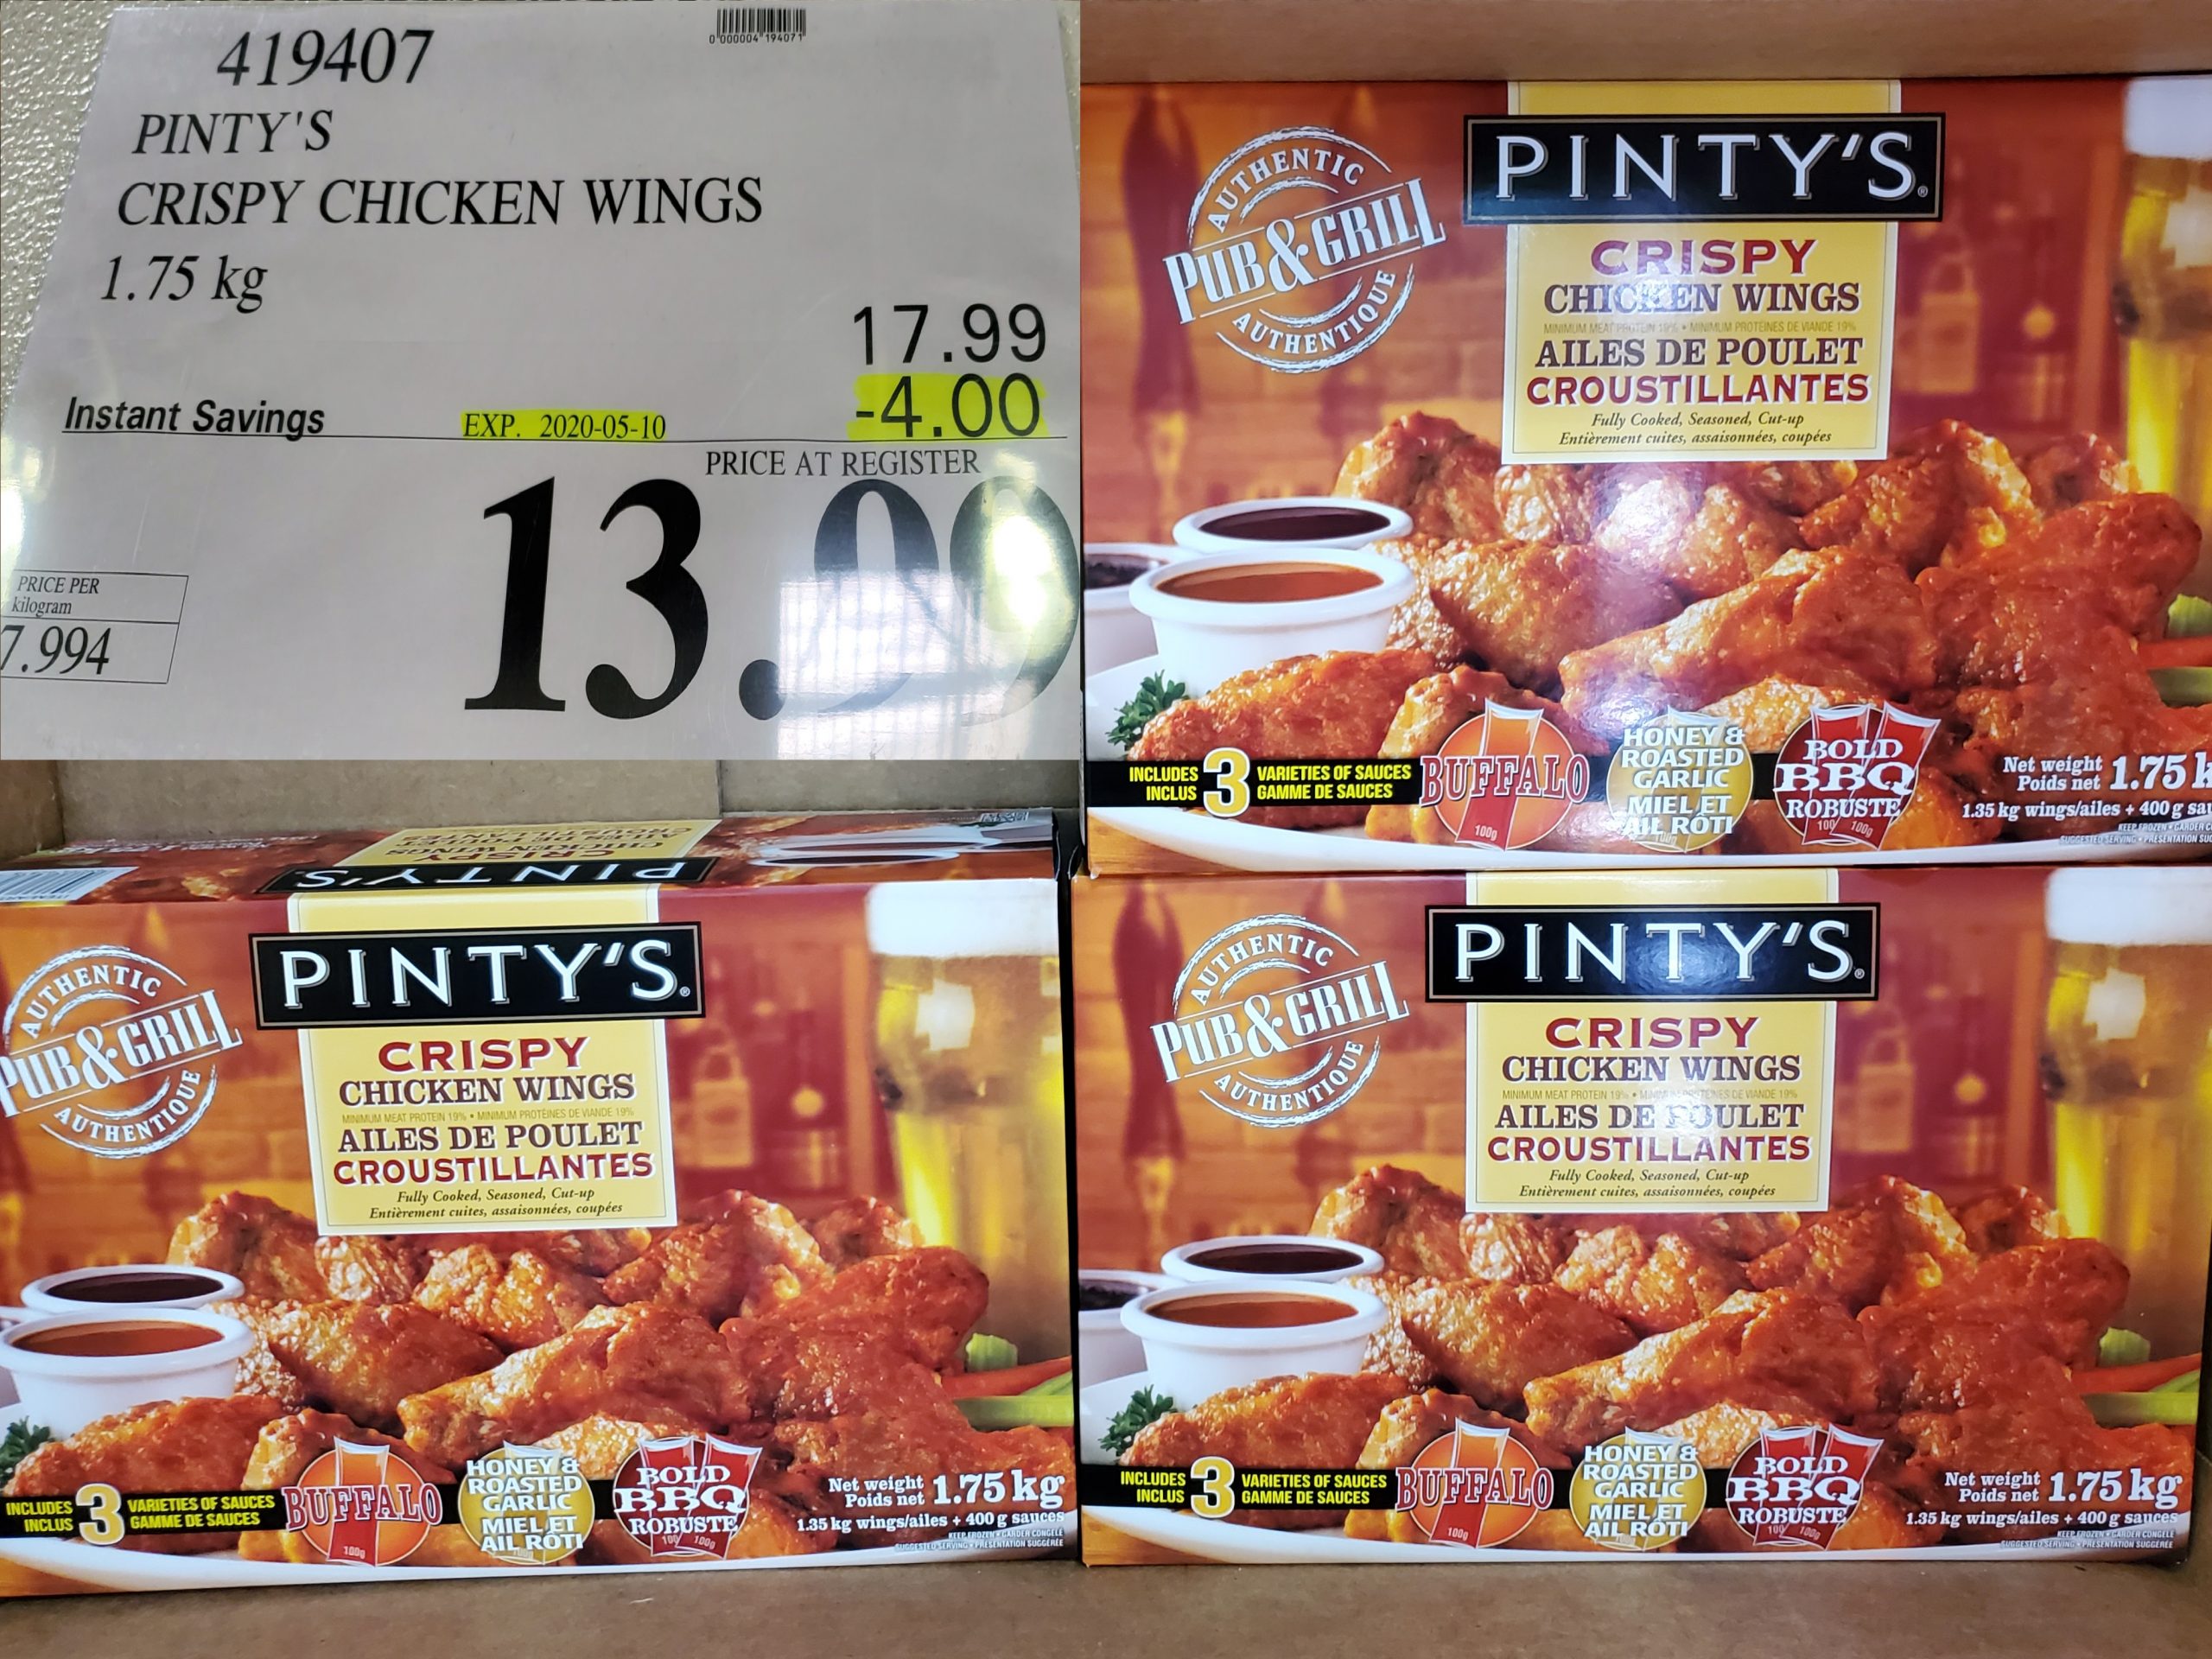 Pinty's Chicken Wings Costco : West Costco Sales Items For November 16 22 2015 For Bc Alberta Manitoba Saskatchewan Costco West Fan Blog - For actual quantity, refer to product title and description, if different from image.